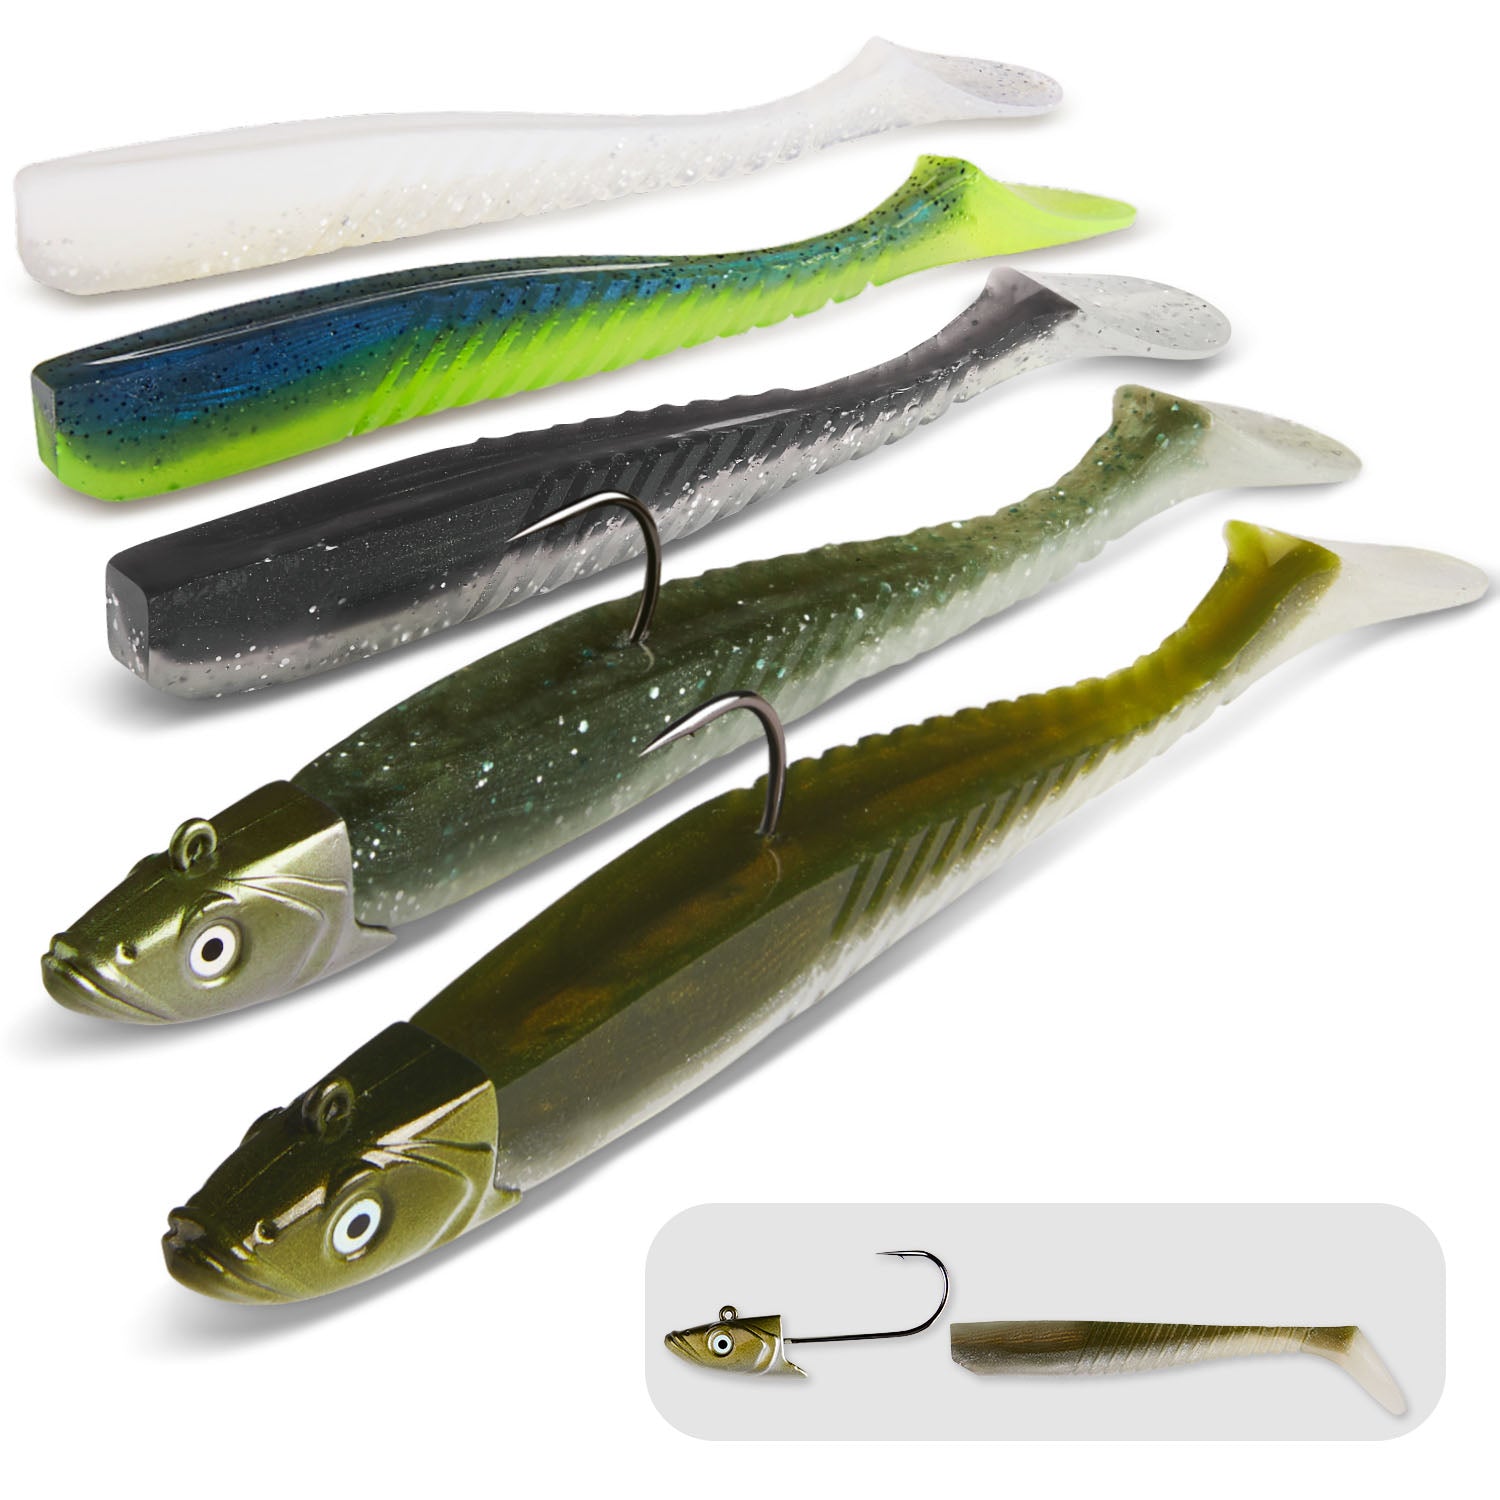  Rodeel Fishing Lure Wraps 8 Packs Clear PVC Lure Covers